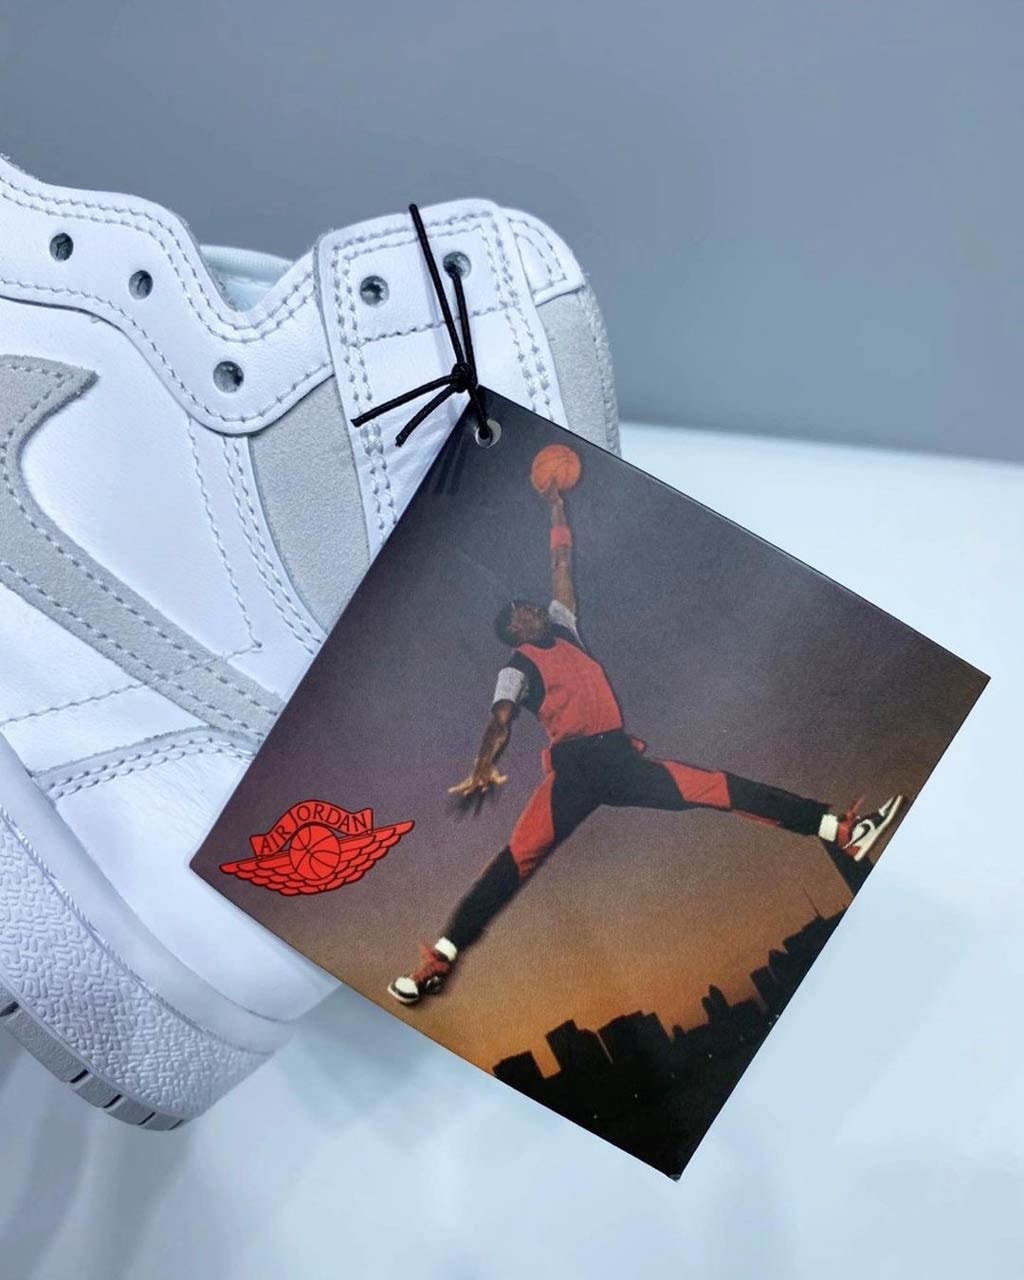 air jordan 1 brand hi high 85 neutral grey white BQ4422 100 official release date info photos price store list buying guide